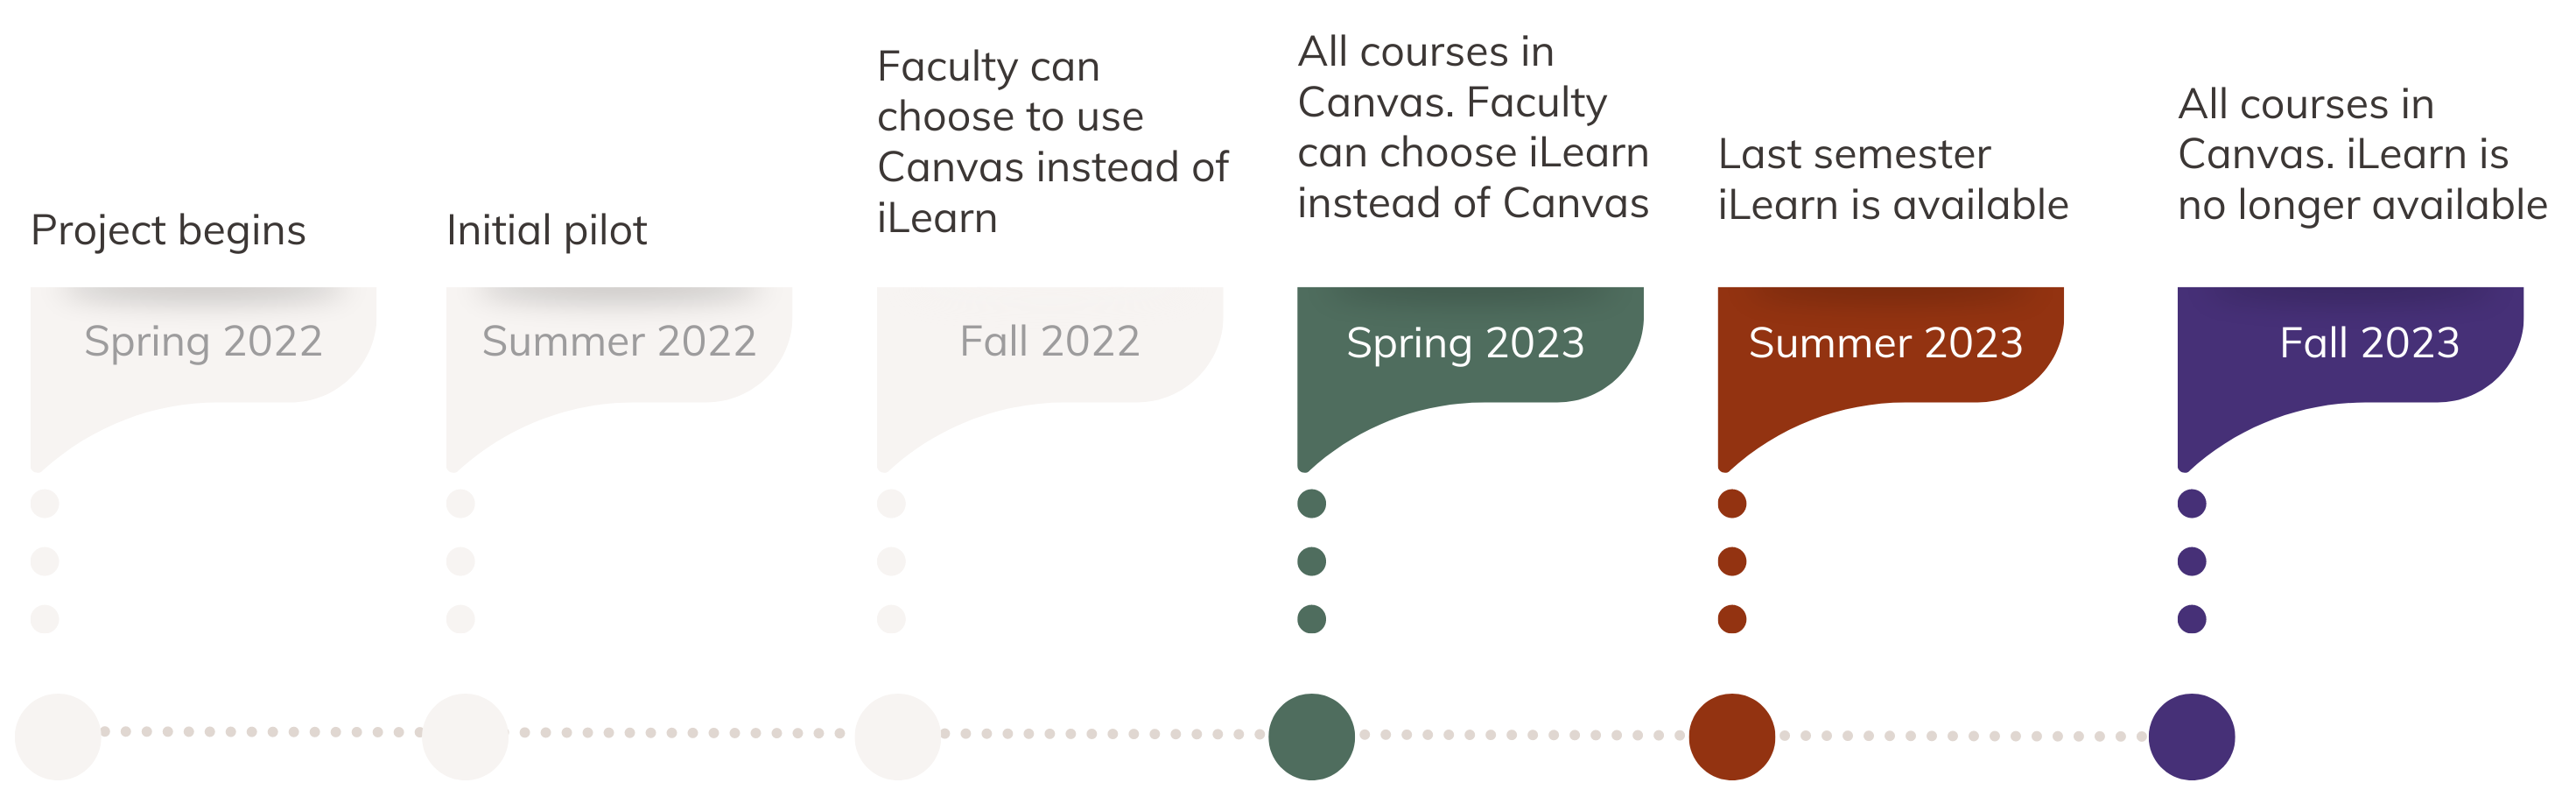 A timeline starting in Spring 2022 when the project started and ending in Fall 2023 when iLearn is no longer available